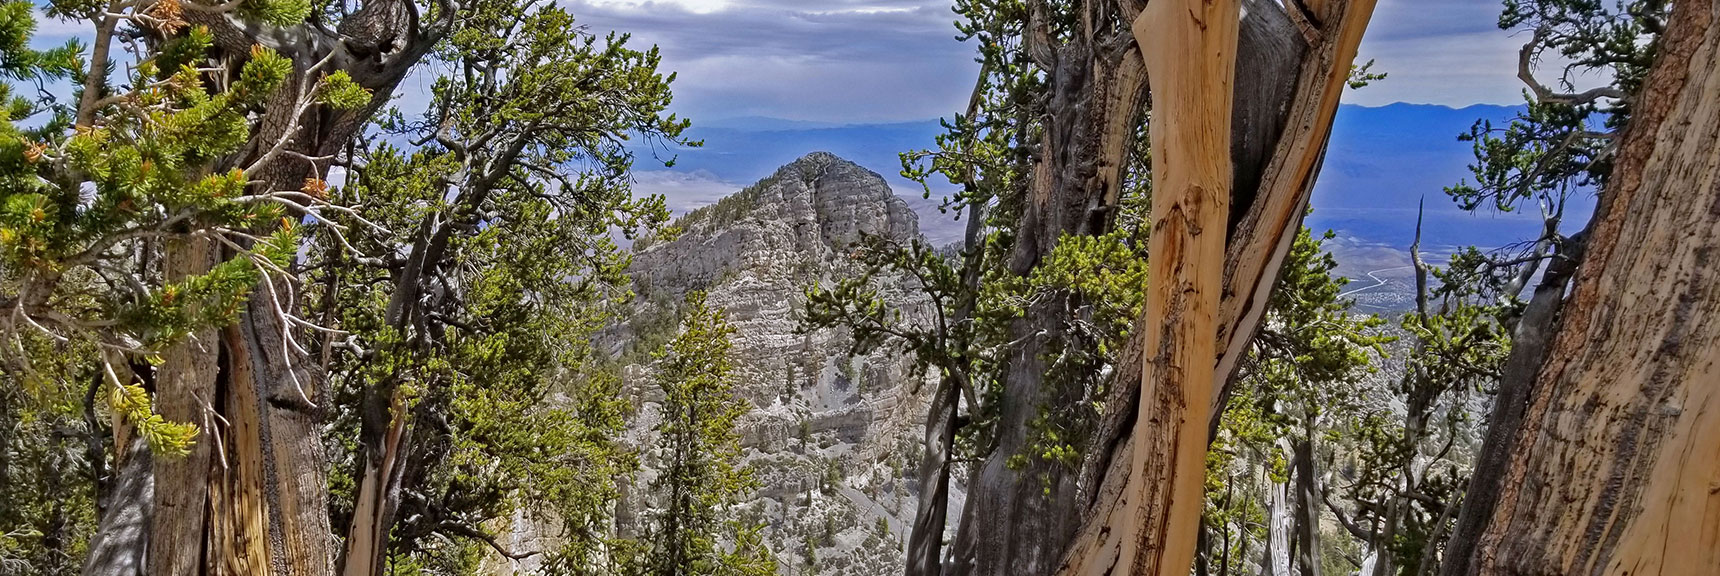 The Sisters North Viewed Through the Bristlecone Pines on The Sisters South Summit. | The Sisters South | Lee Canyon | Mt Charleston Wilderness | Spring Mountains, Nevada